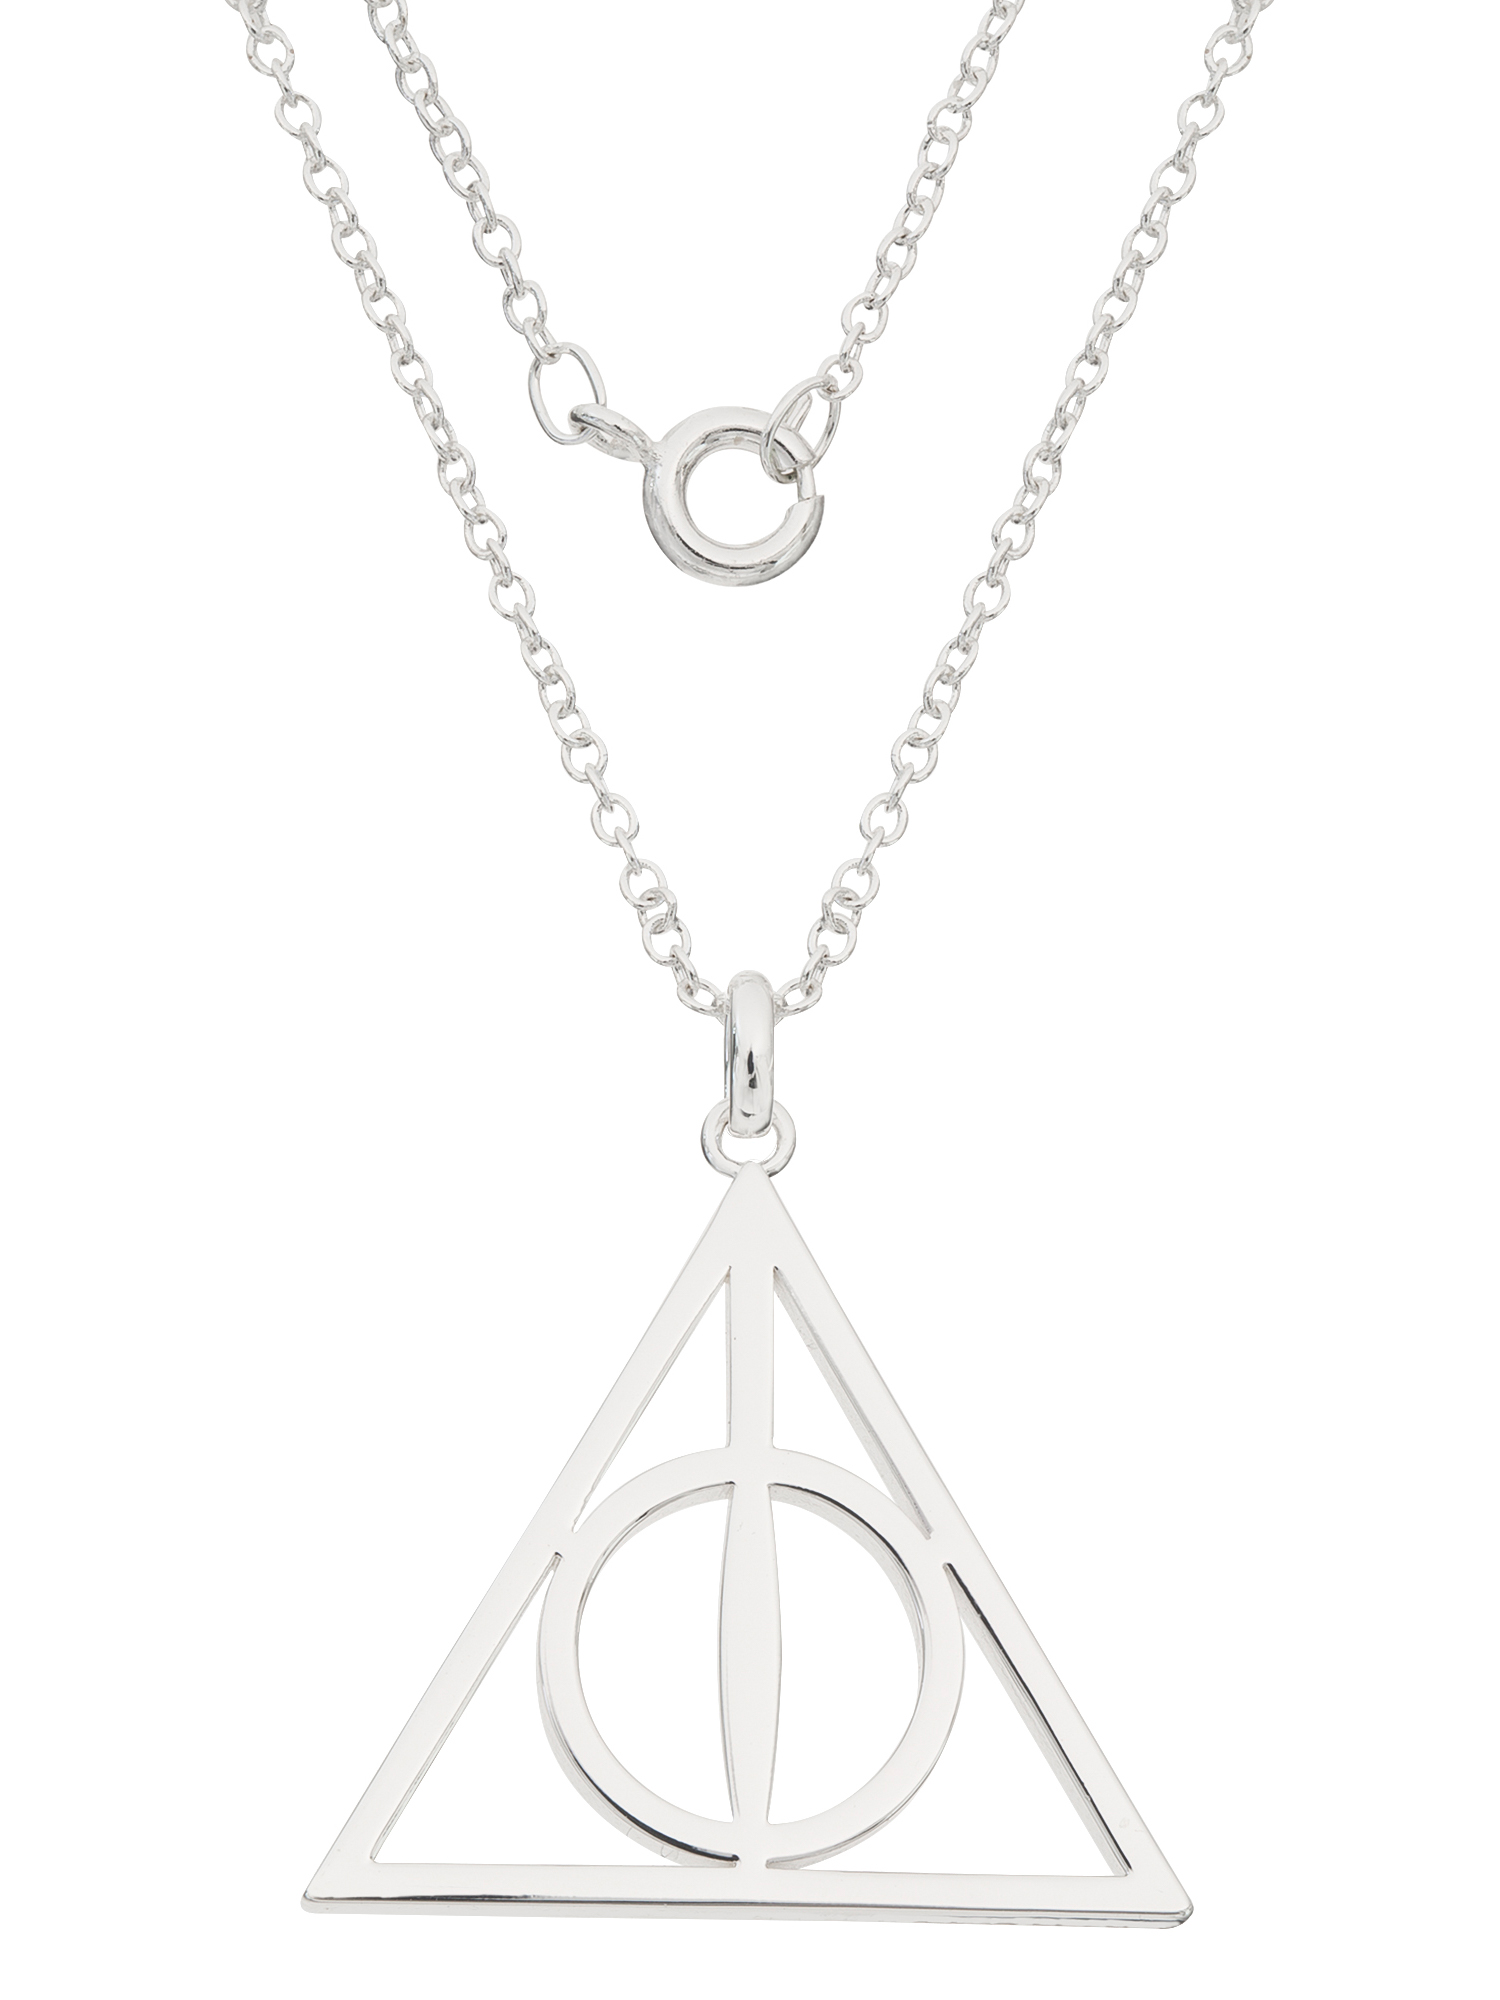 Harry Potter Deathly Hollow Silver Plated Brass Pendant, 18" - image 2 of 4